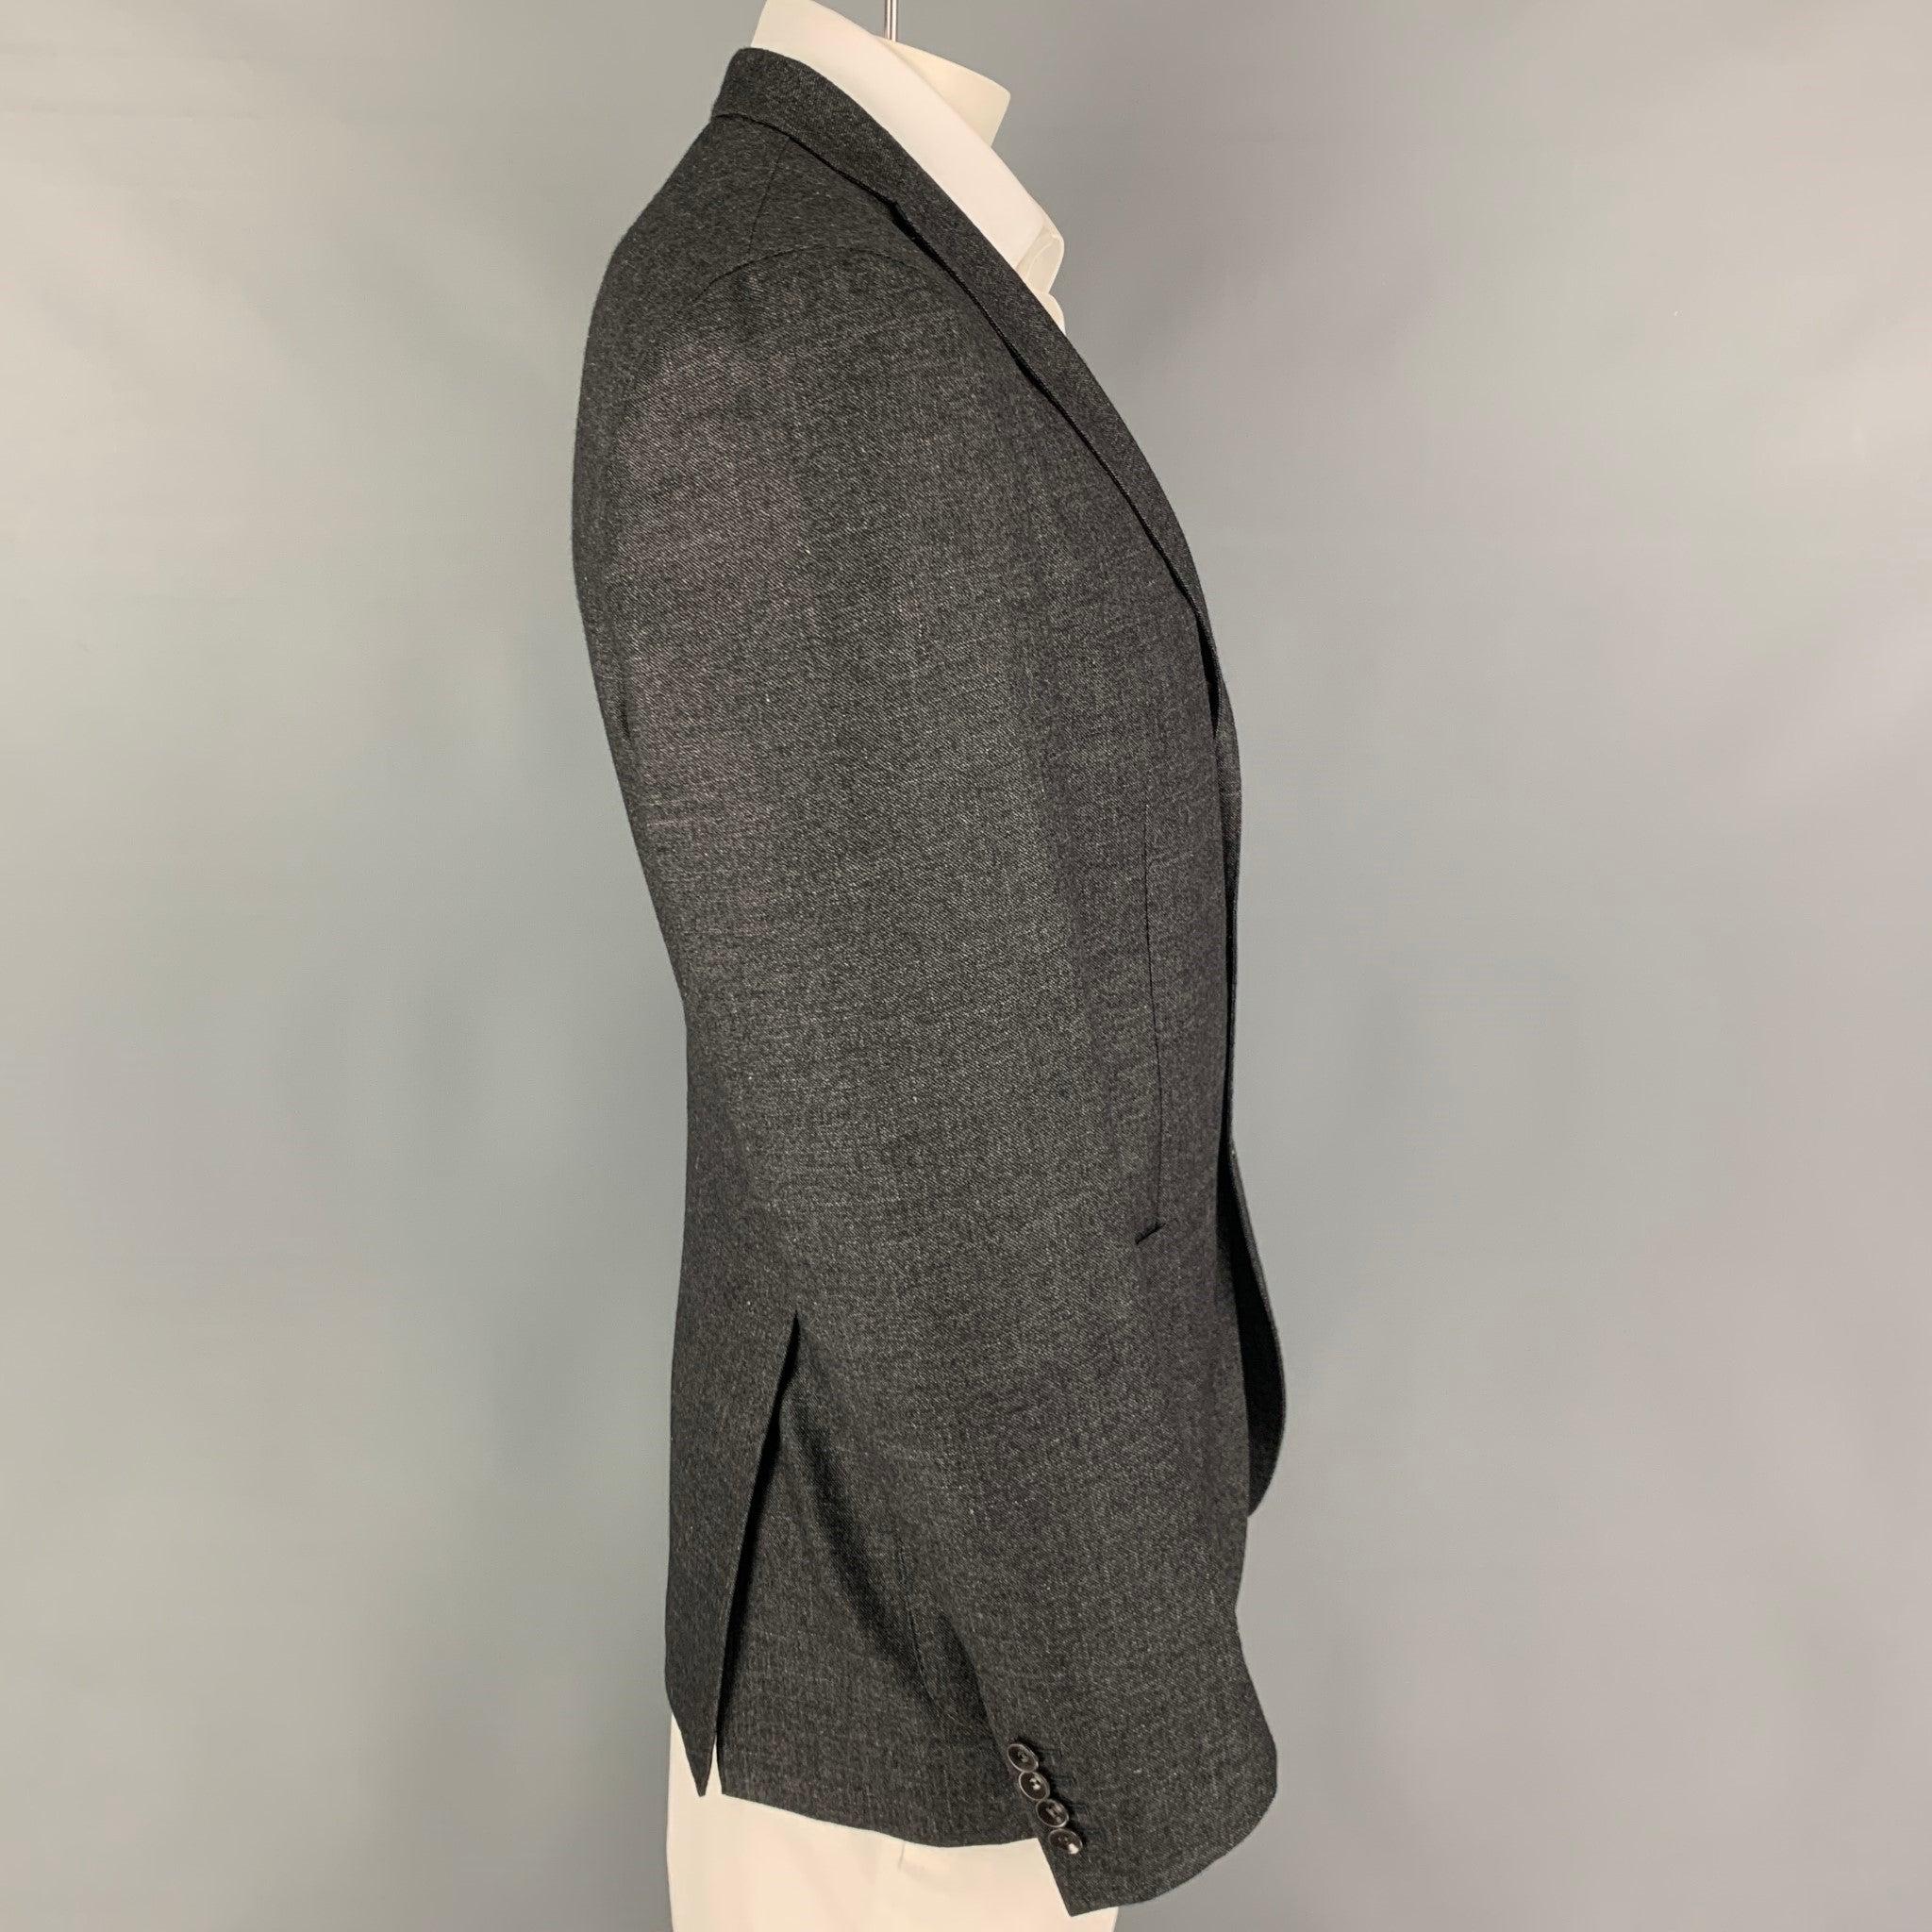 BOGLIOLI sport coat comes in a grey charcoal wool blend featuring a notch lapel, patch pockets, double back vent, and a double button closure. Made in Italy. Excellent Pre-Owned Condition. 

Marked:   50 

Measurements: 
 
Shoulder: 17 inches